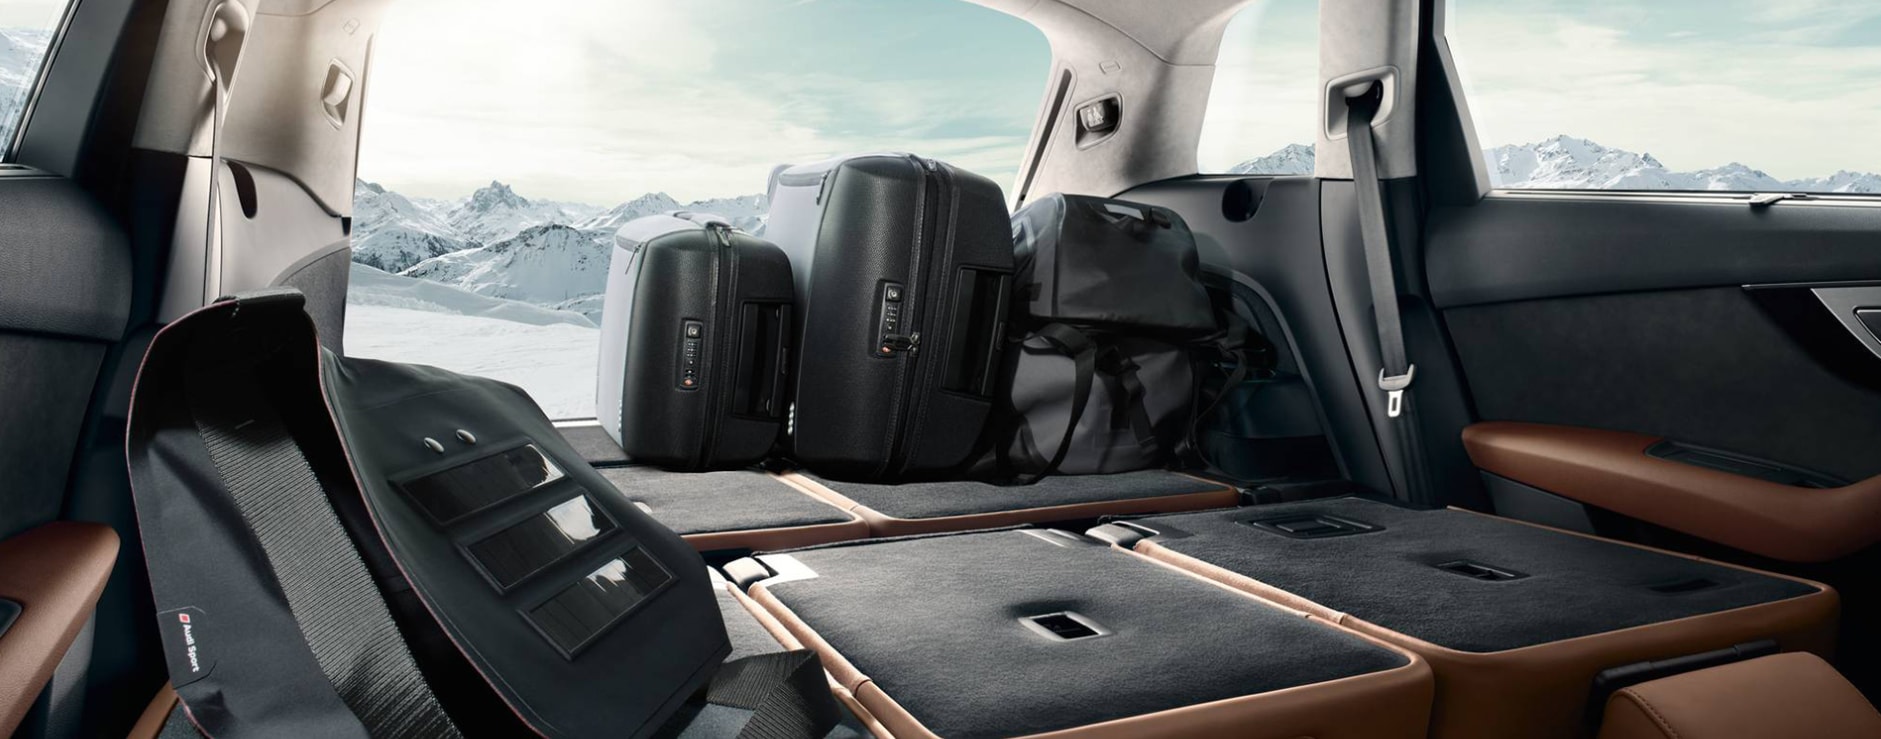 A view of the interior cargo and back seats folded down of a 2023 Audi Q7